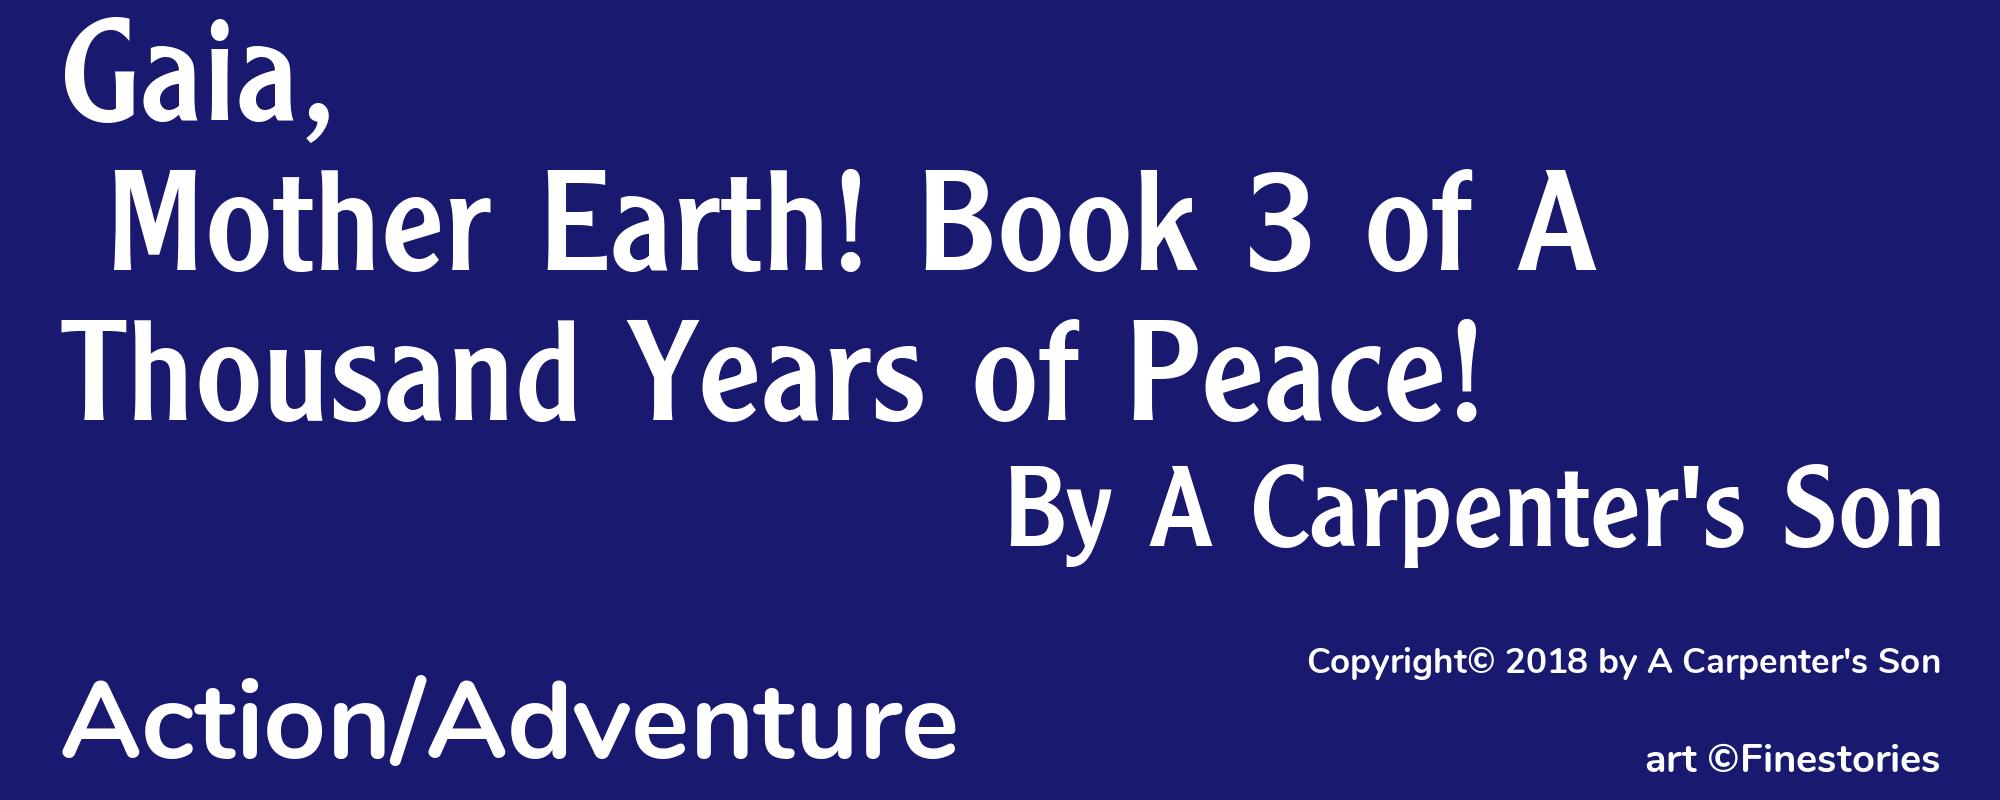 Gaia, Mother Earth! Book 3 of A Thousand Years of Peace! - Cover